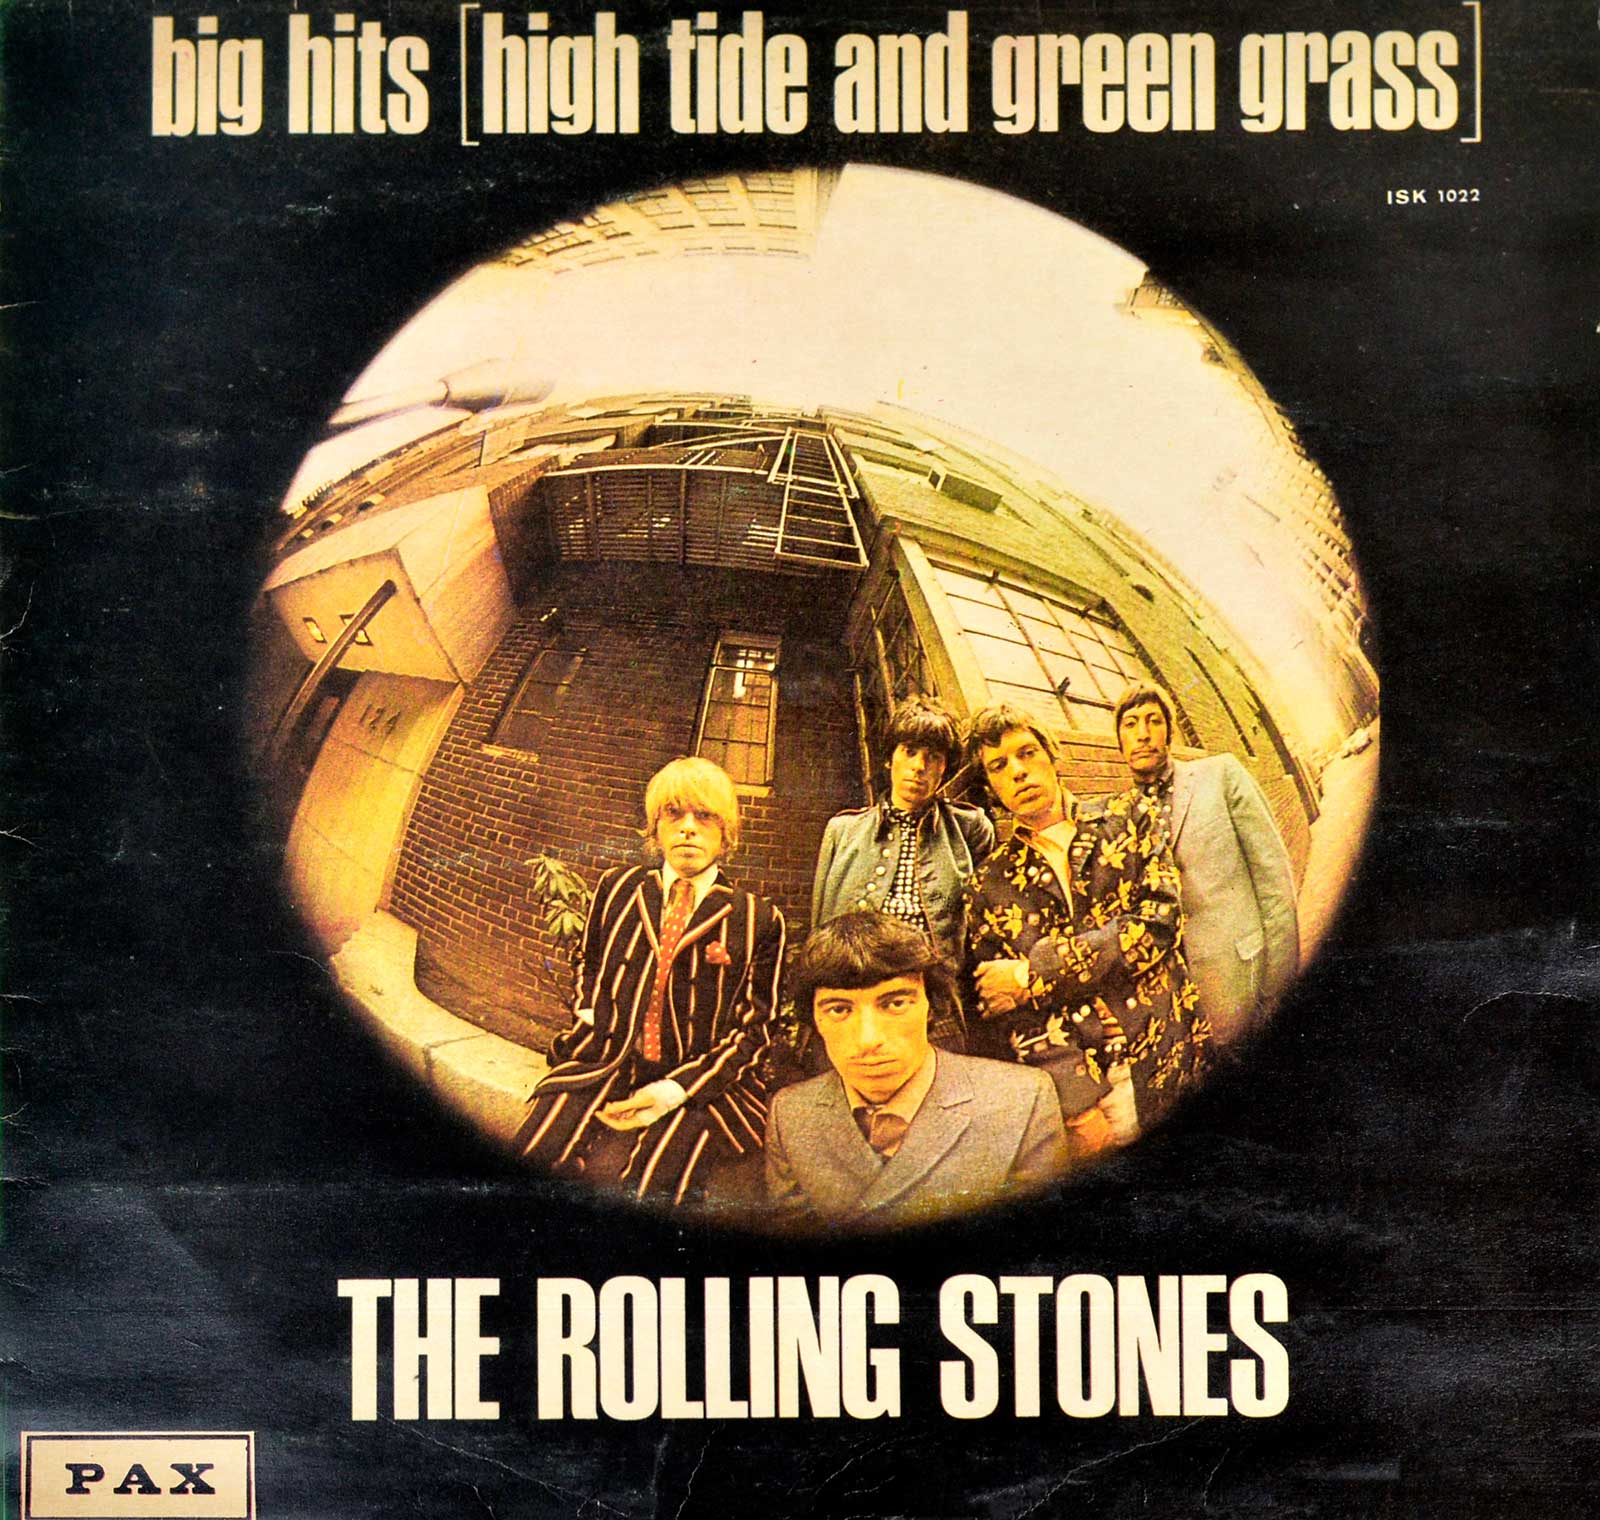 large album front cover photo of: Rolling Stones BIG HITS